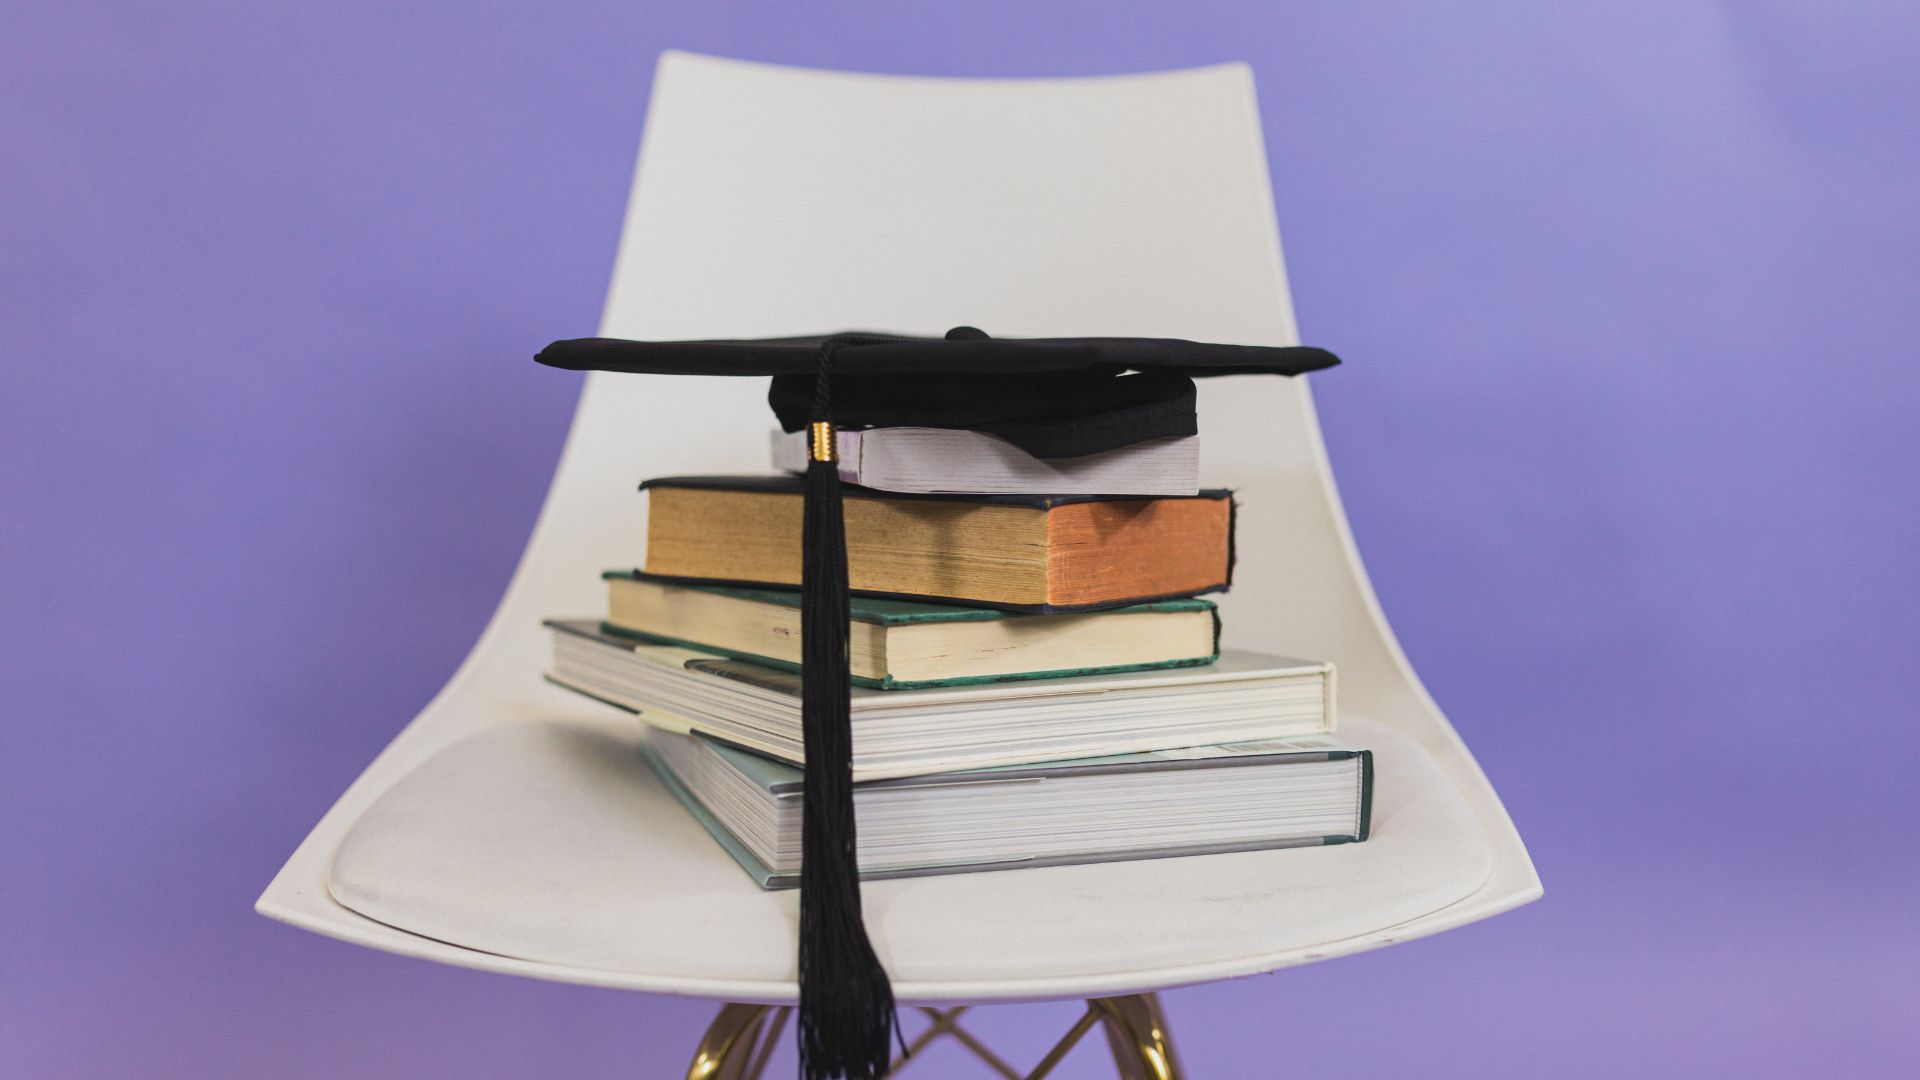 graduate cap on top of a stack of school books for college